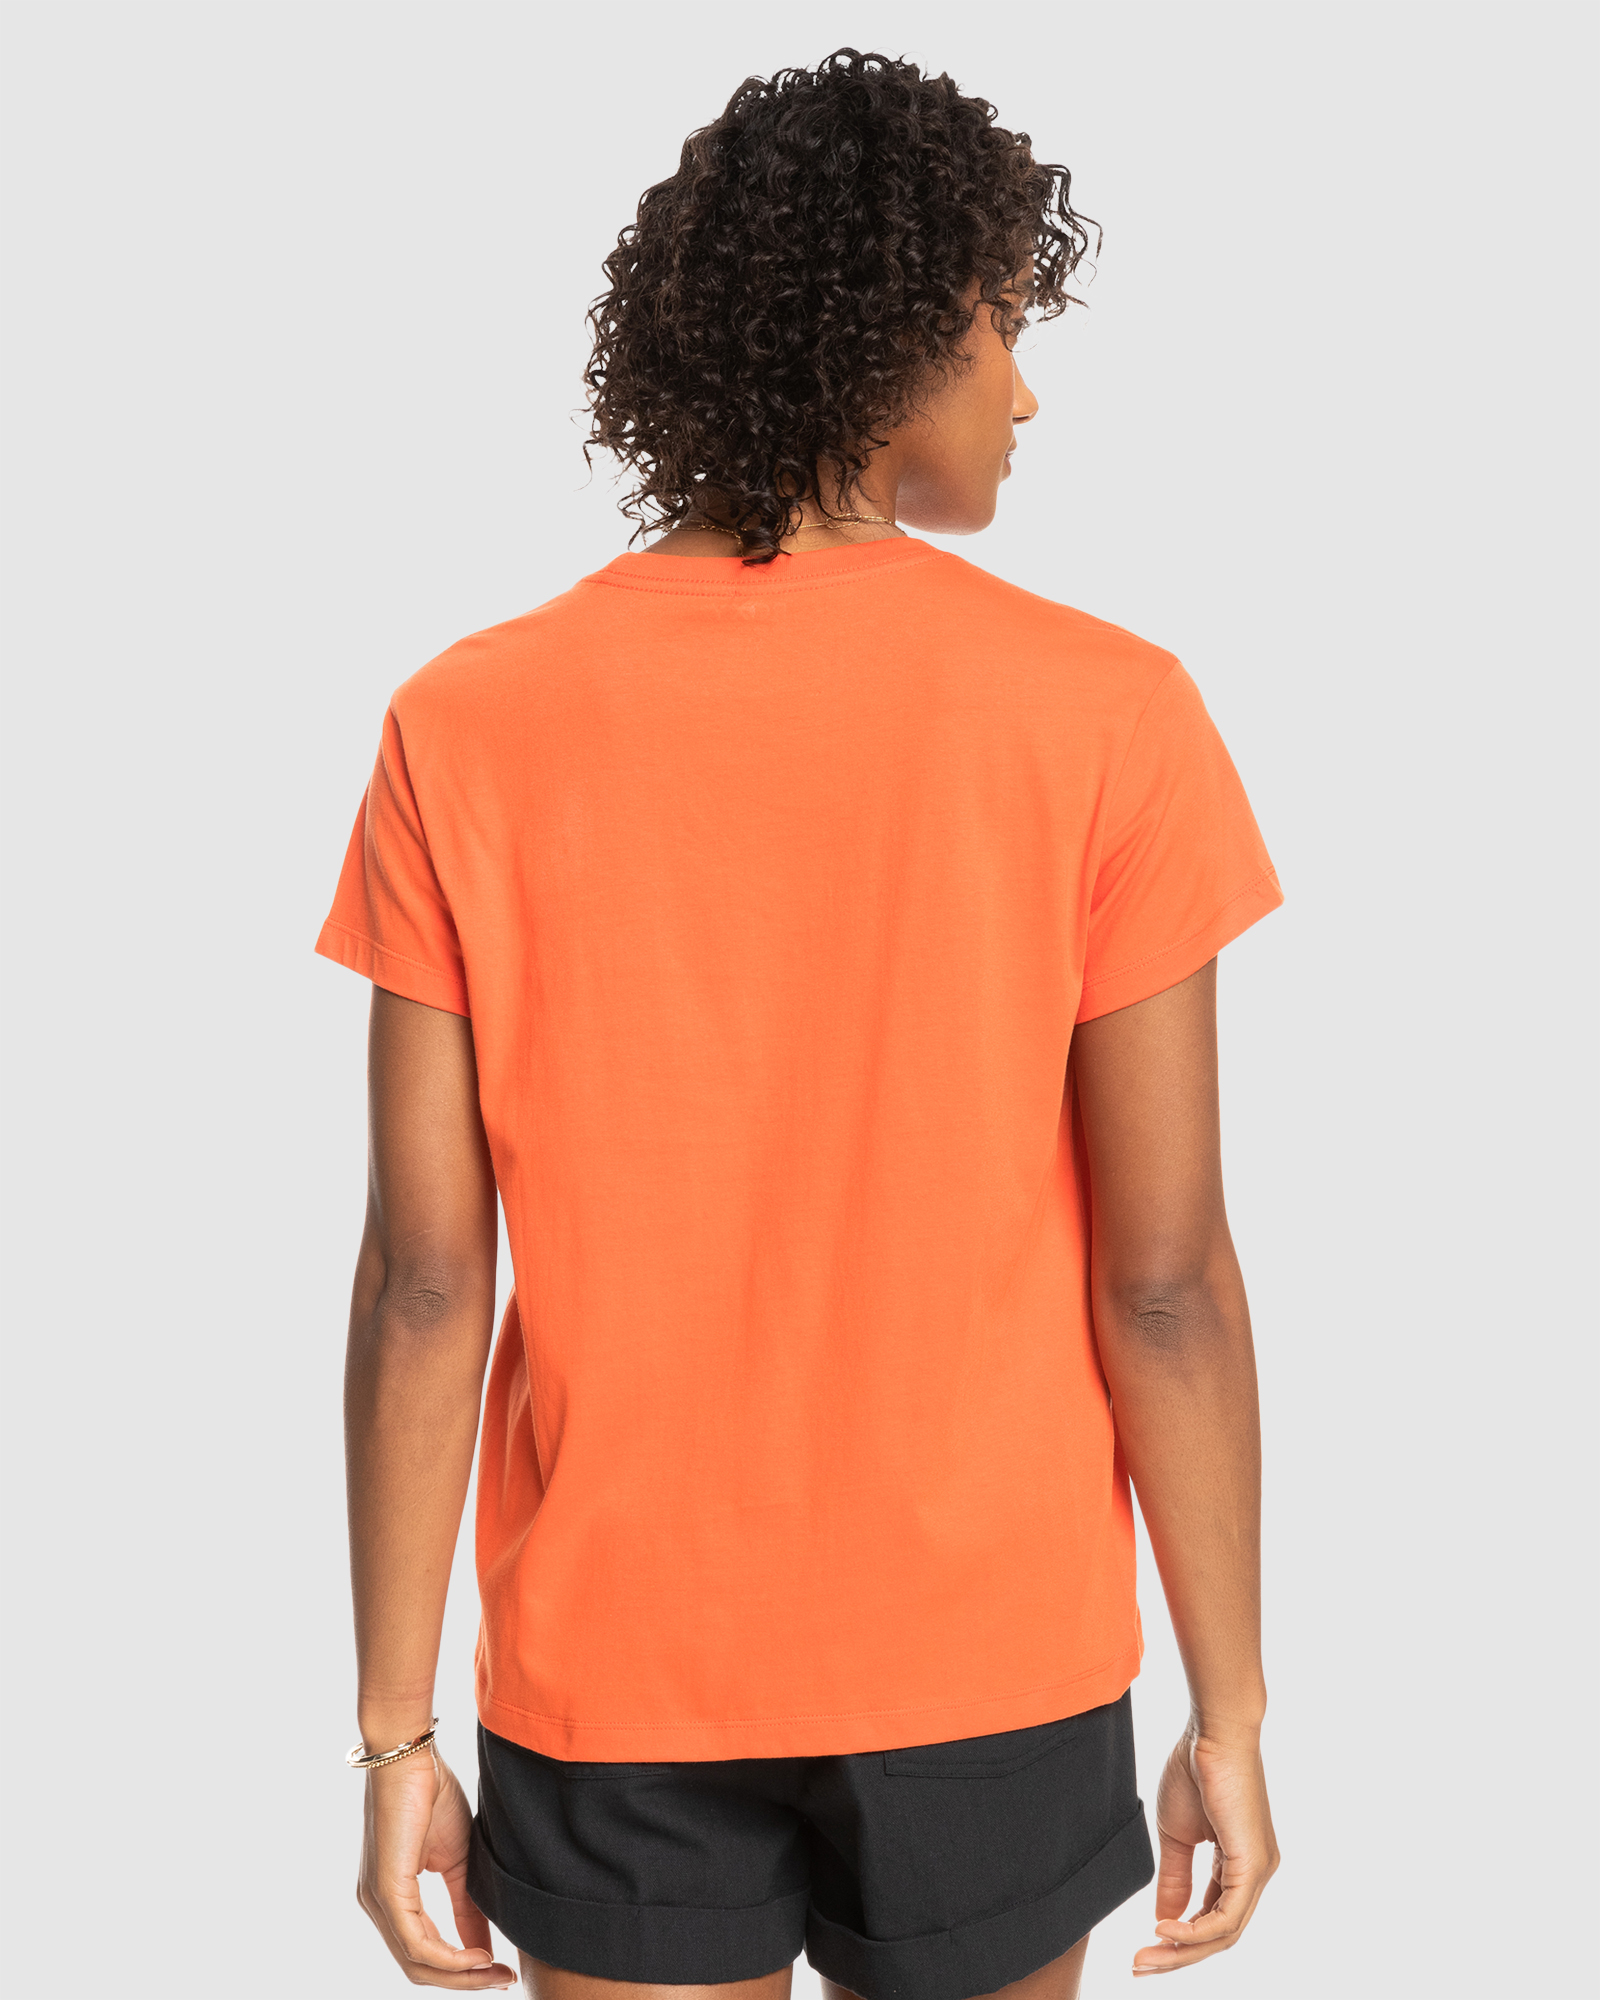 Roxy Womens Just Do You Tee - Tigerlily | SurfStitch